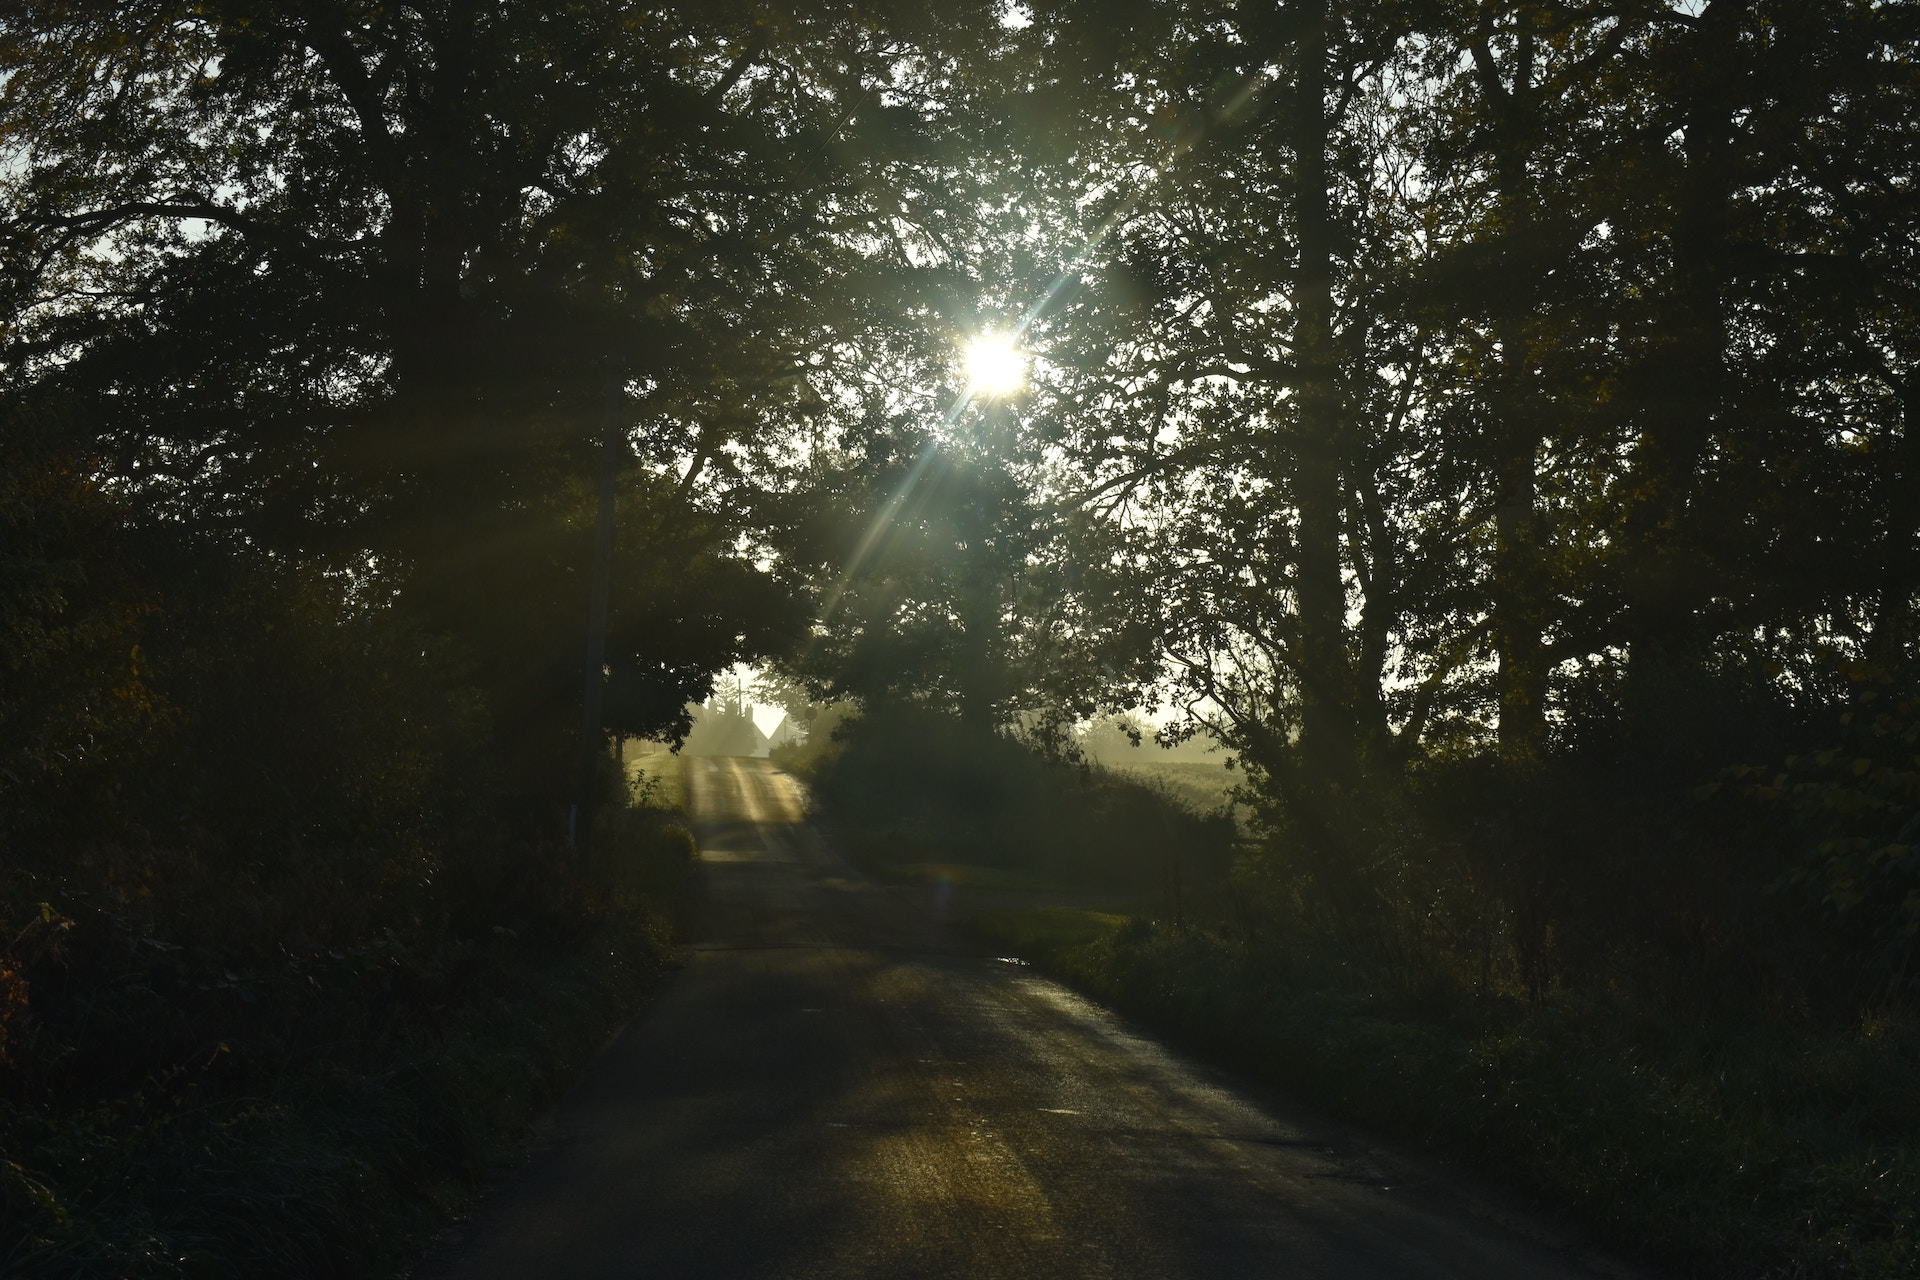 road with trees either side and sunlight peering through